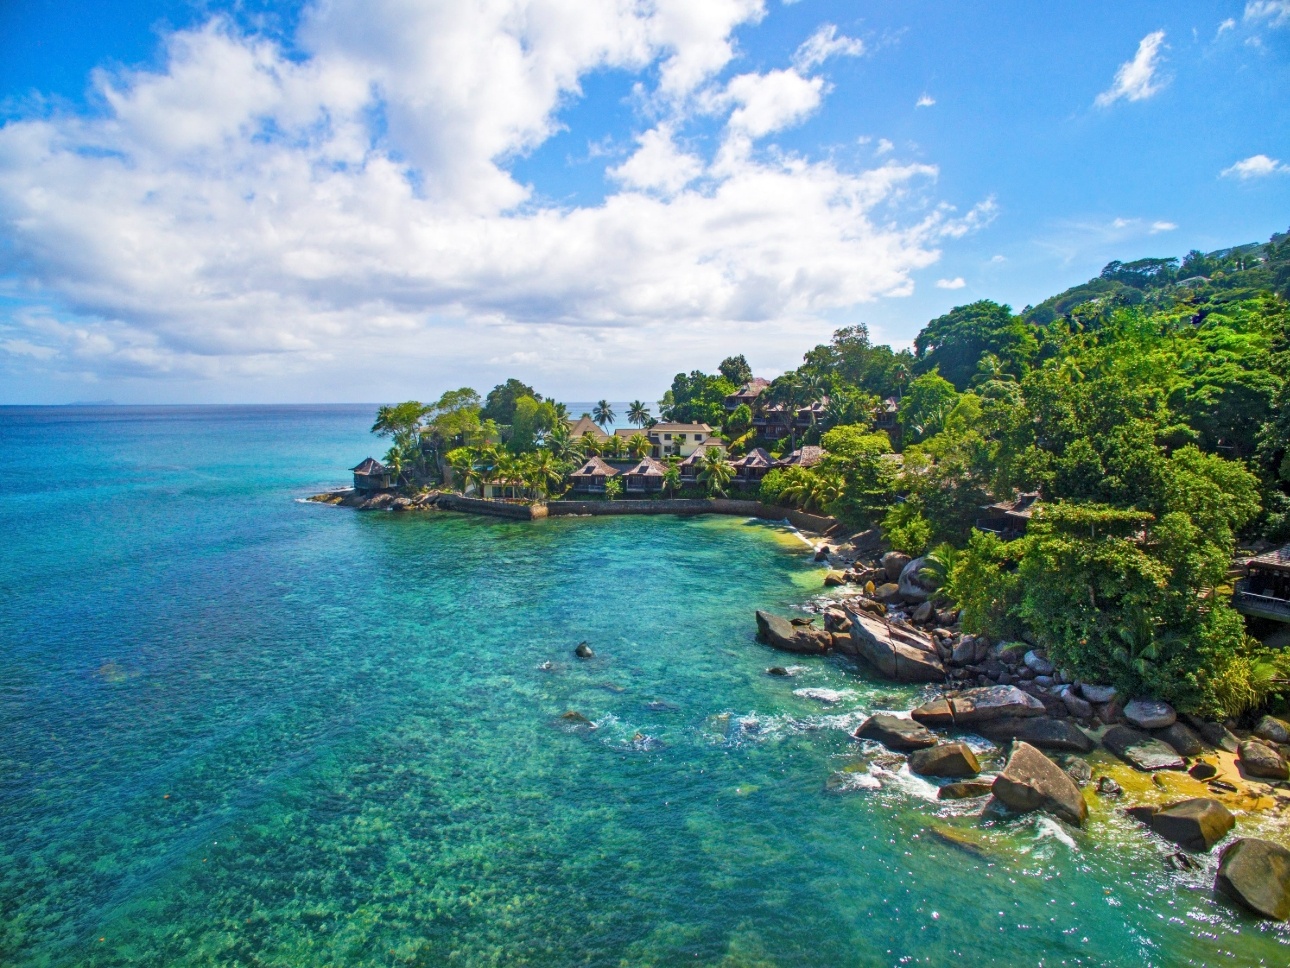 Seychelles Northolme Resort & Spa panoramic view of huts and ocean and island